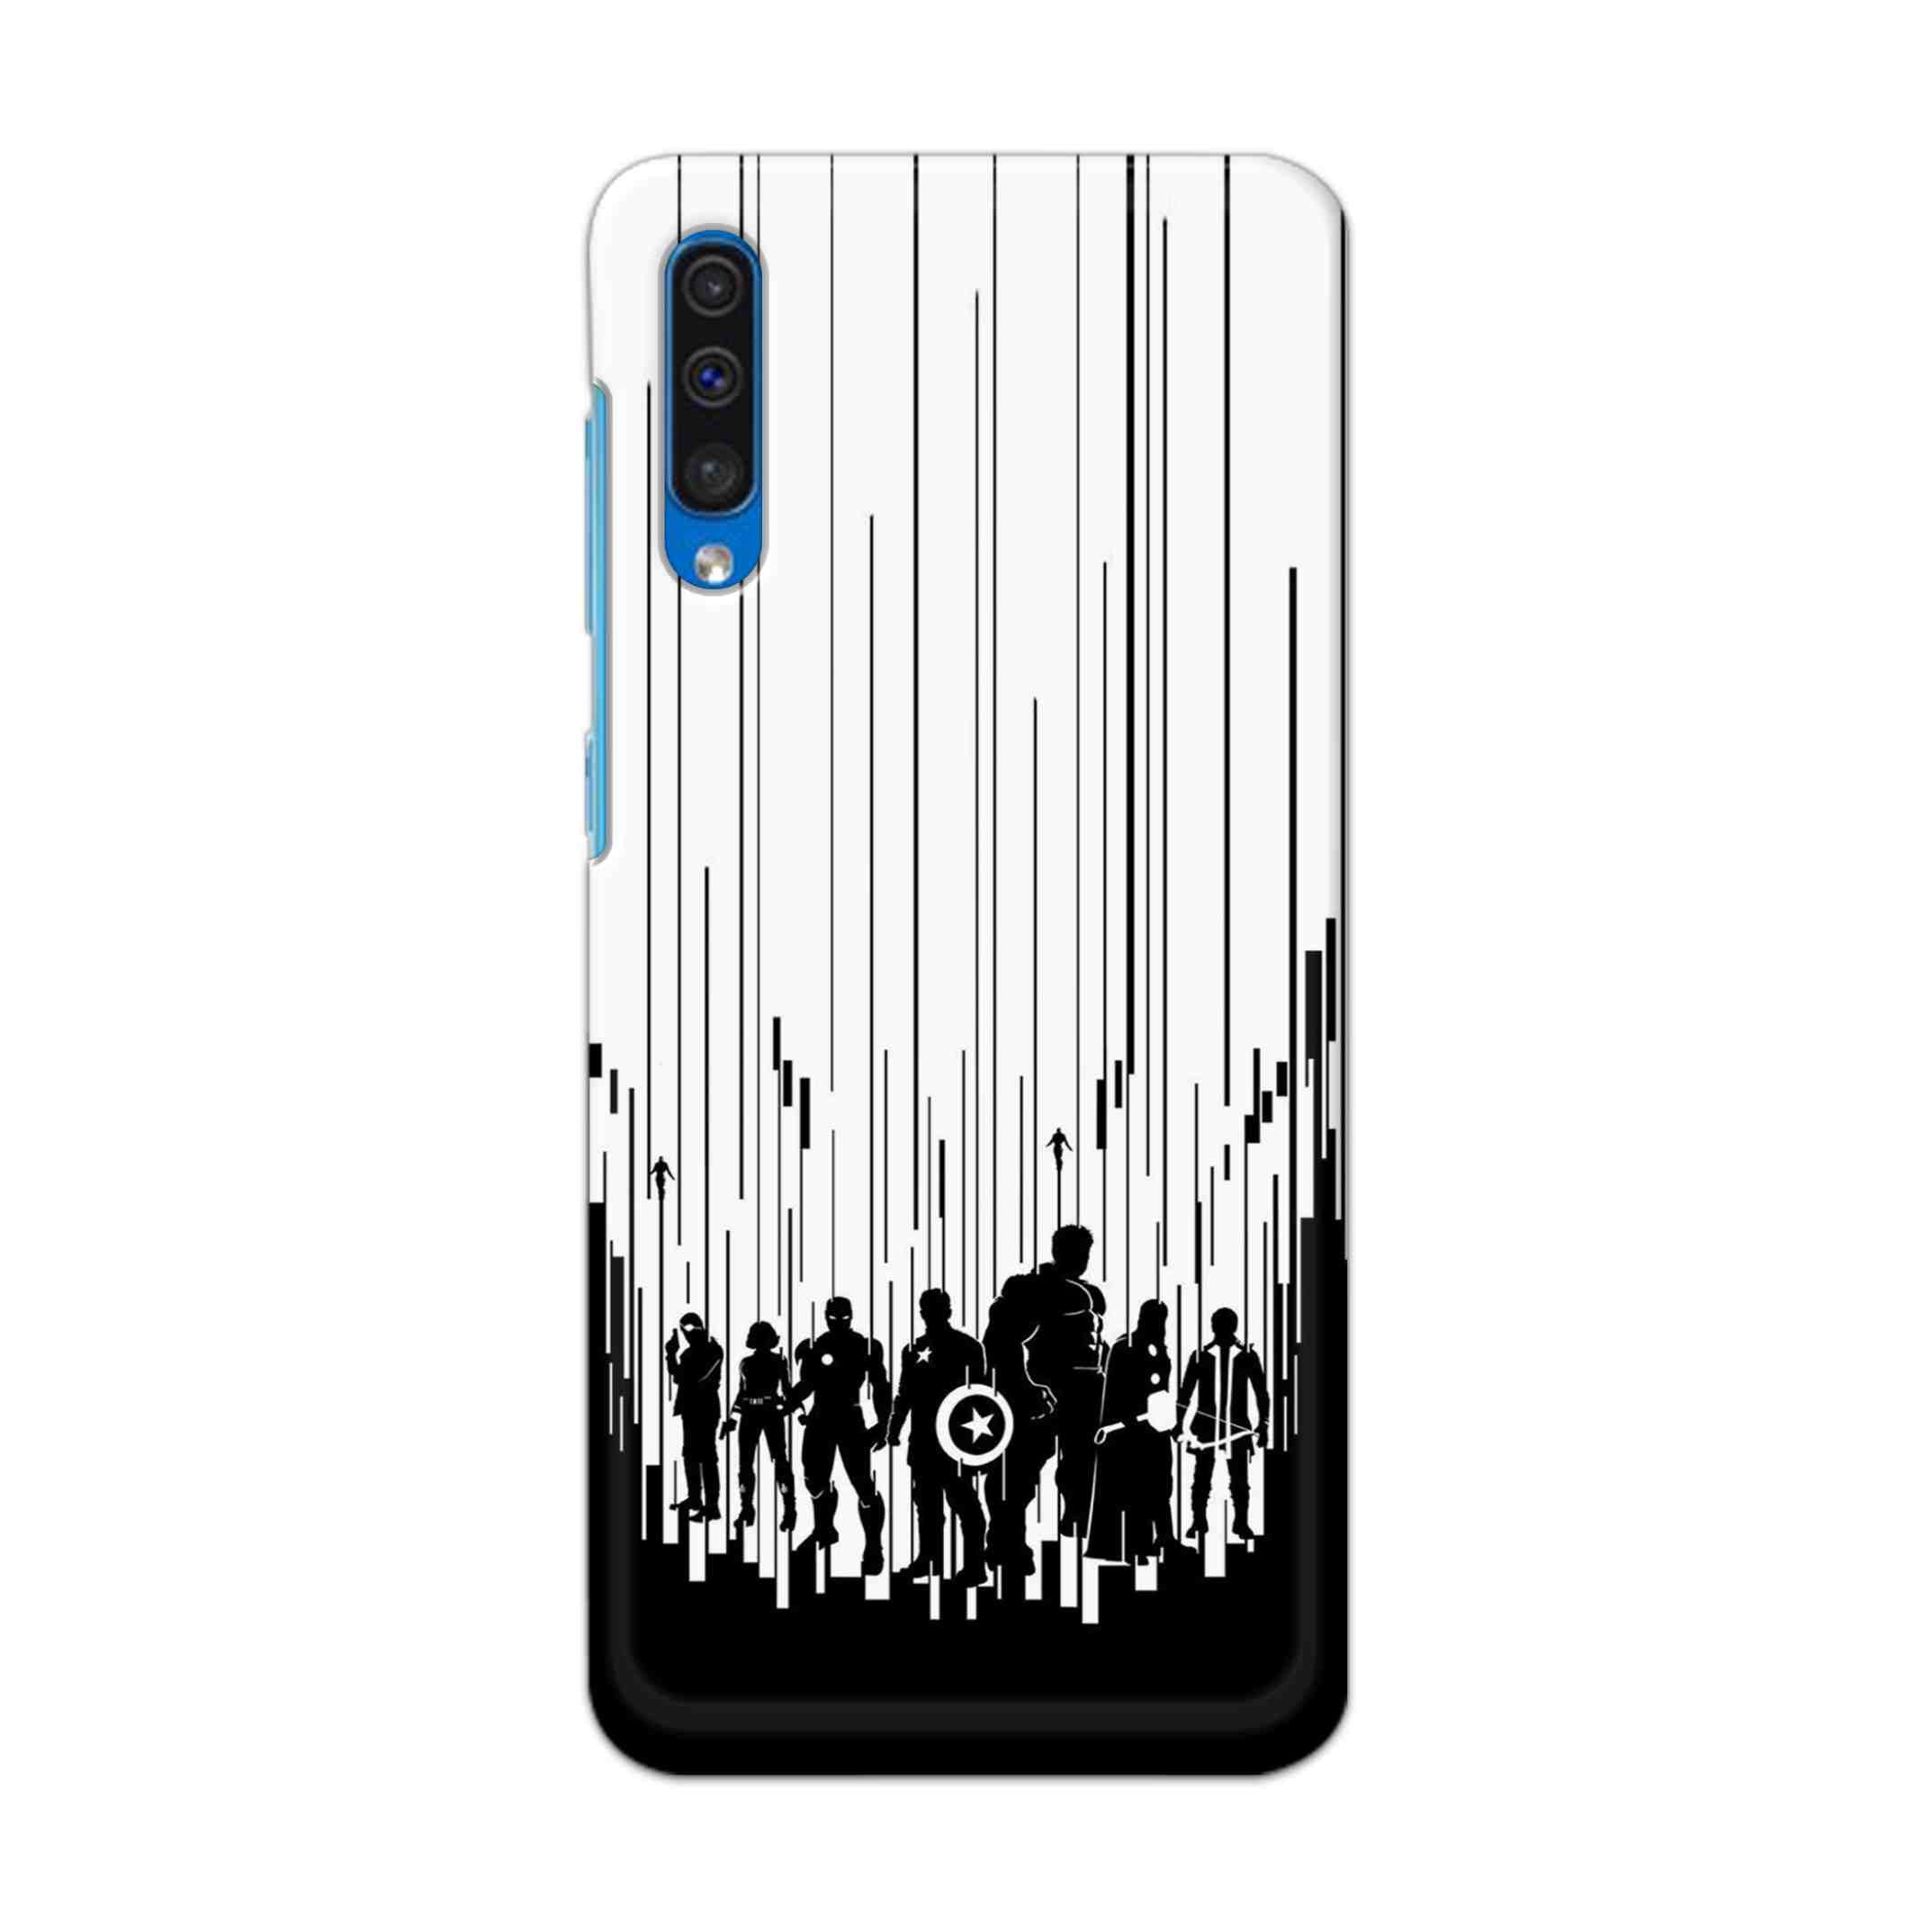 Buy Black And White Avengers Hard Back Mobile Phone Case Cover For Samsung Galaxy A50 / A50s / A30s Online